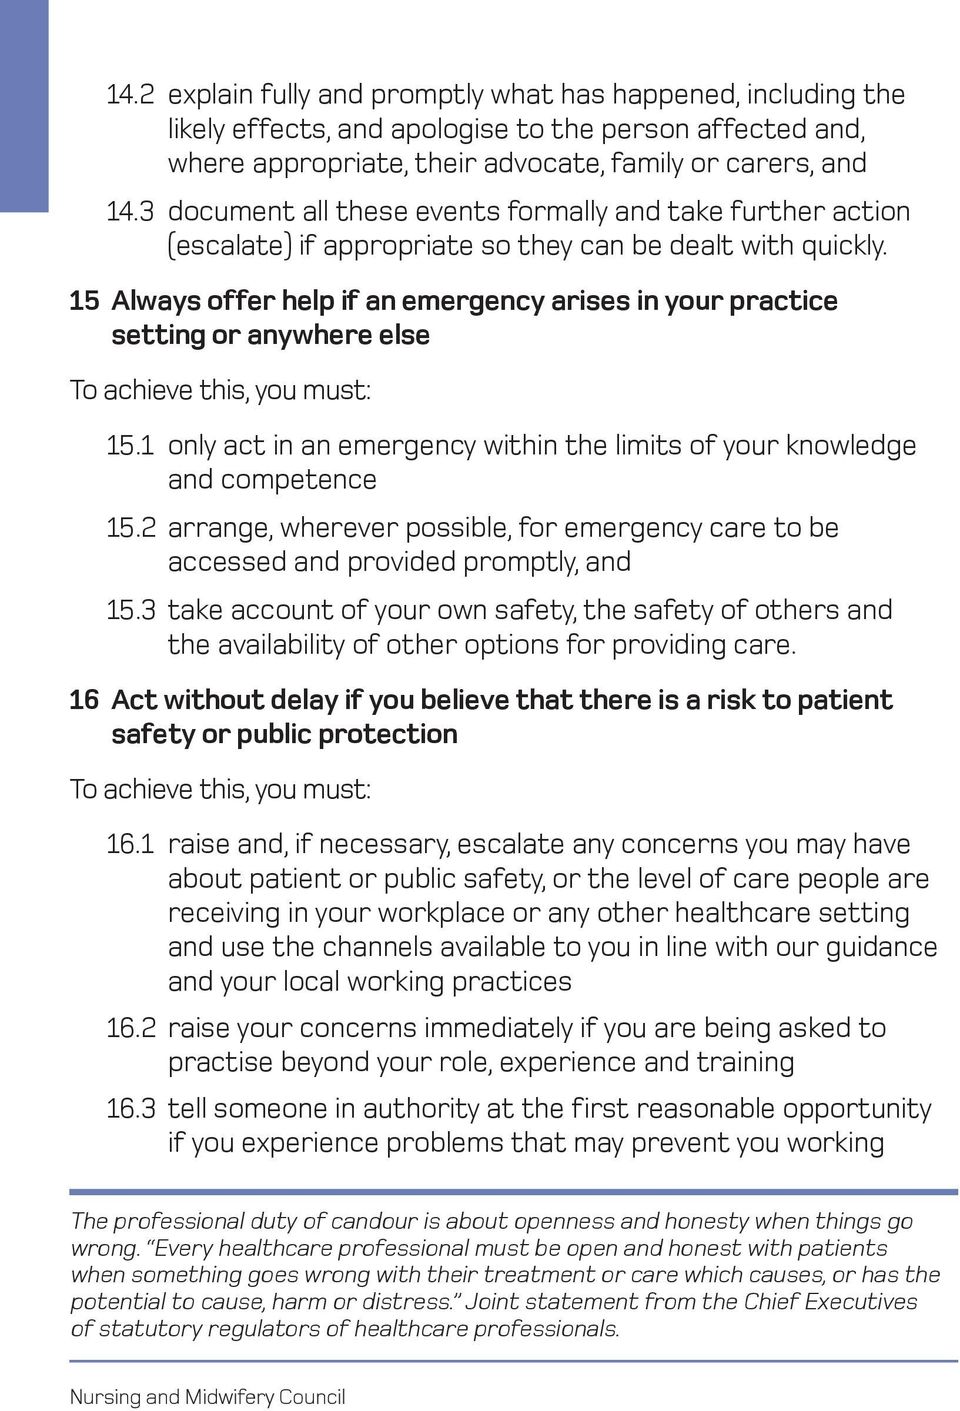 15 Always offer help if an emergency arises in your practice setting or anywhere else 15.1 only act in an emergency within the limits of your knowledge and competence 15.